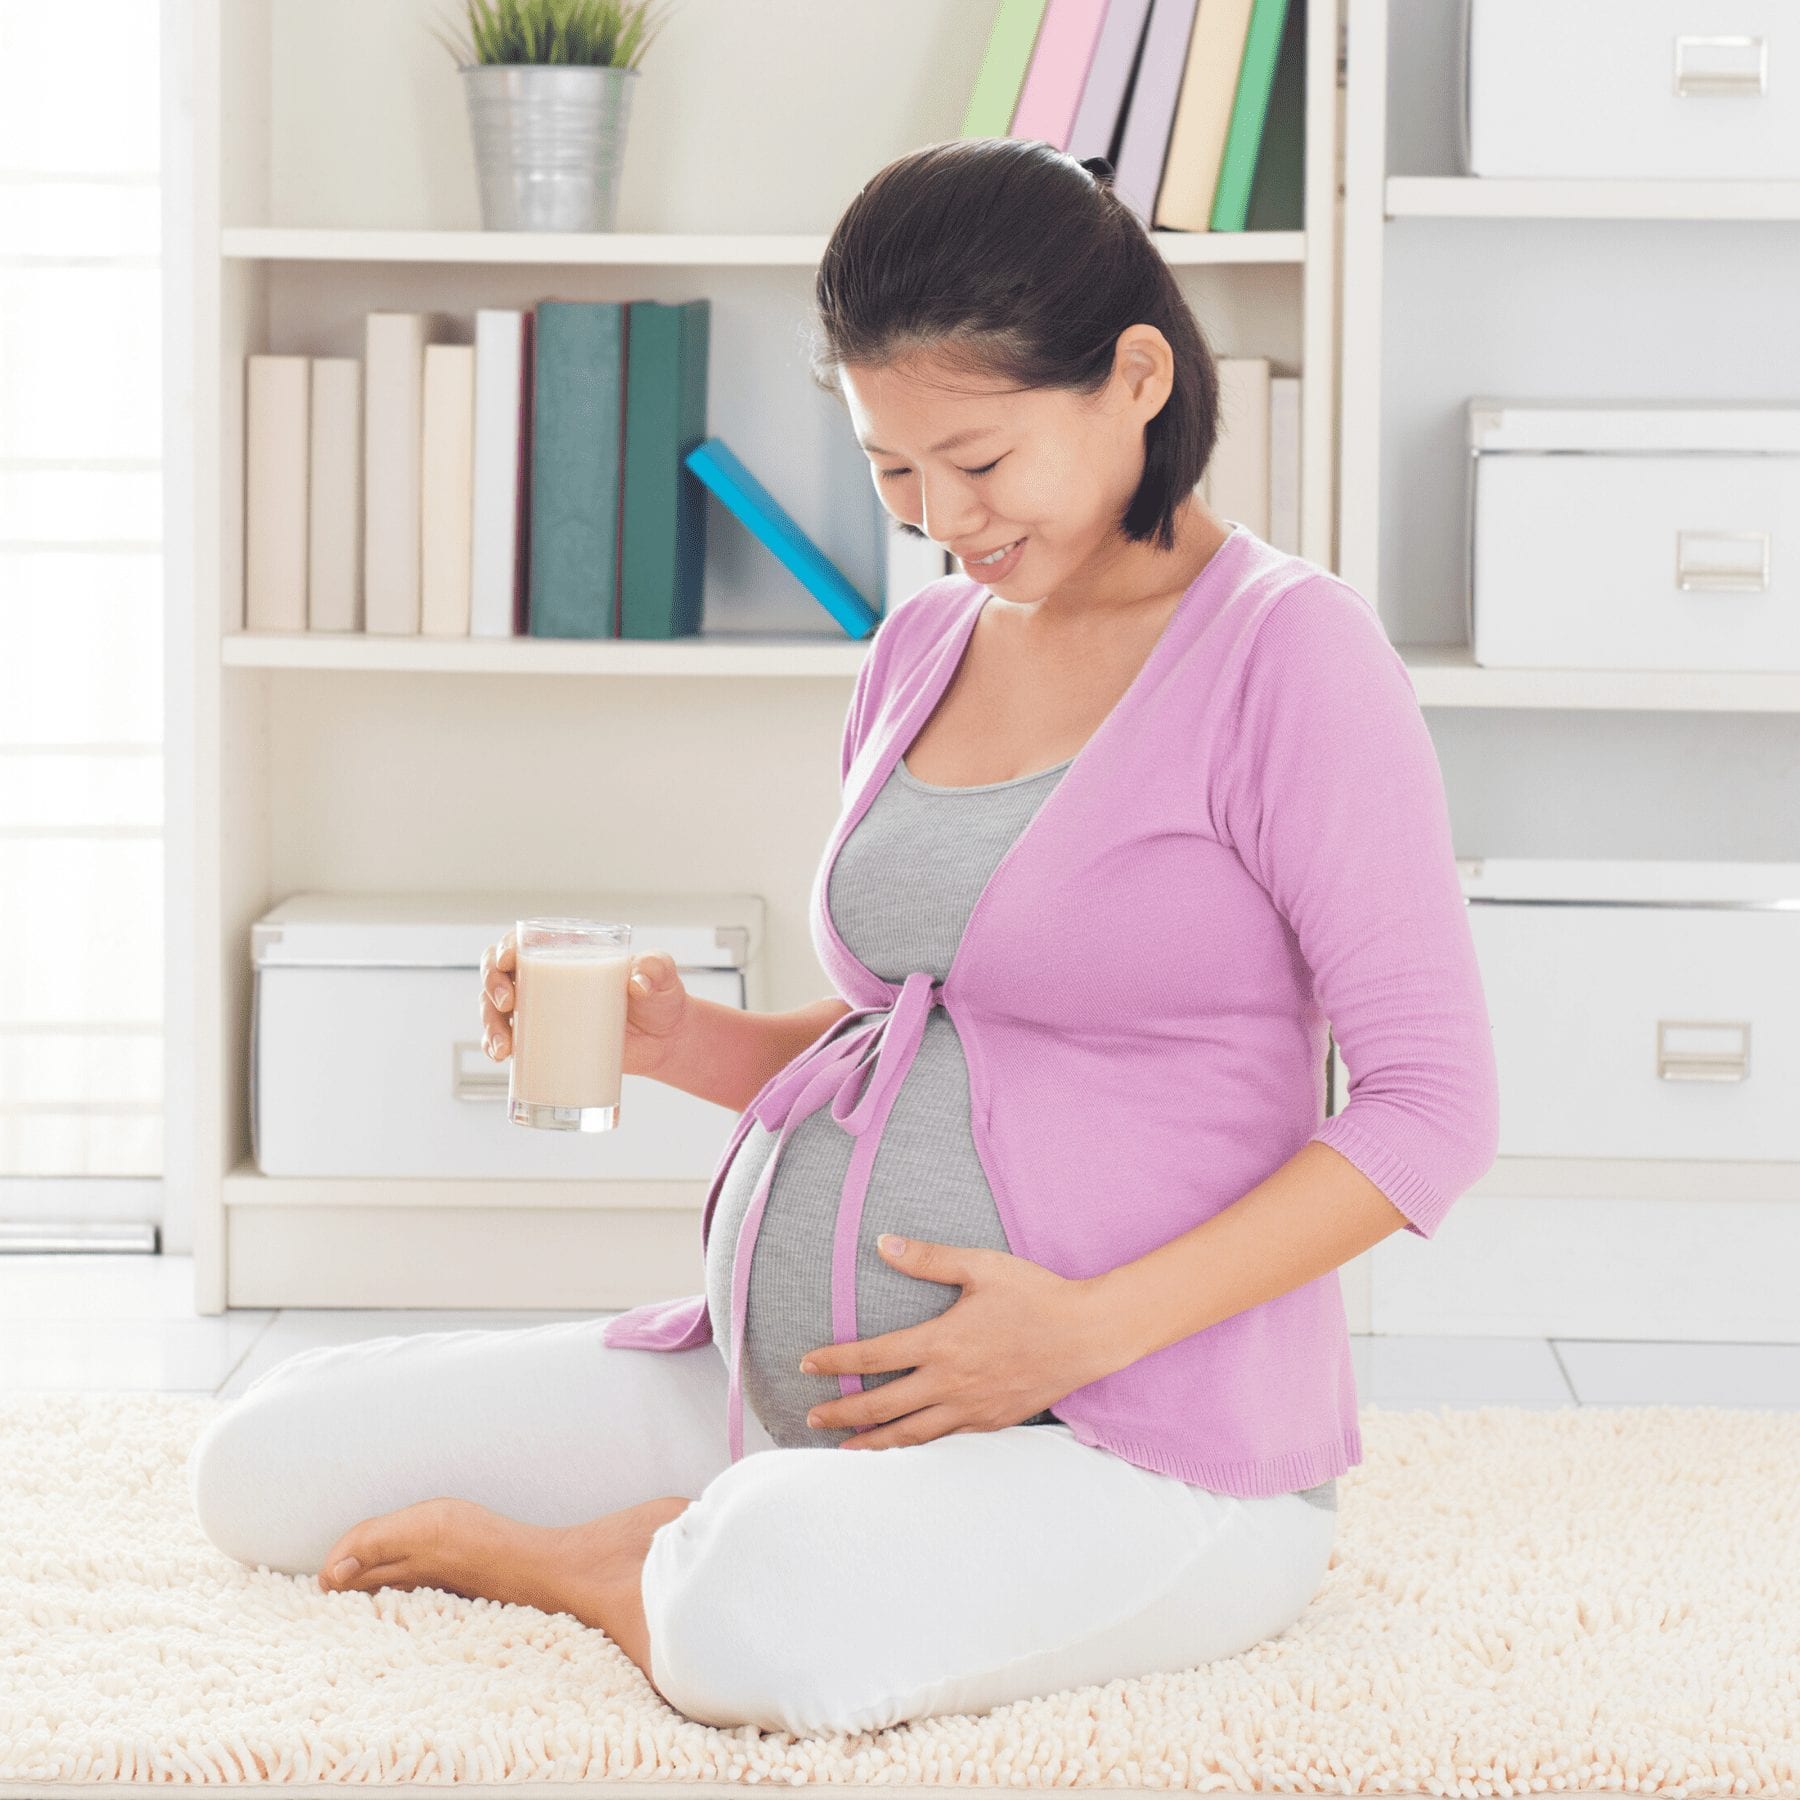 15 Must-Have Natural Pregnancy Essentials — Smart Living Mama